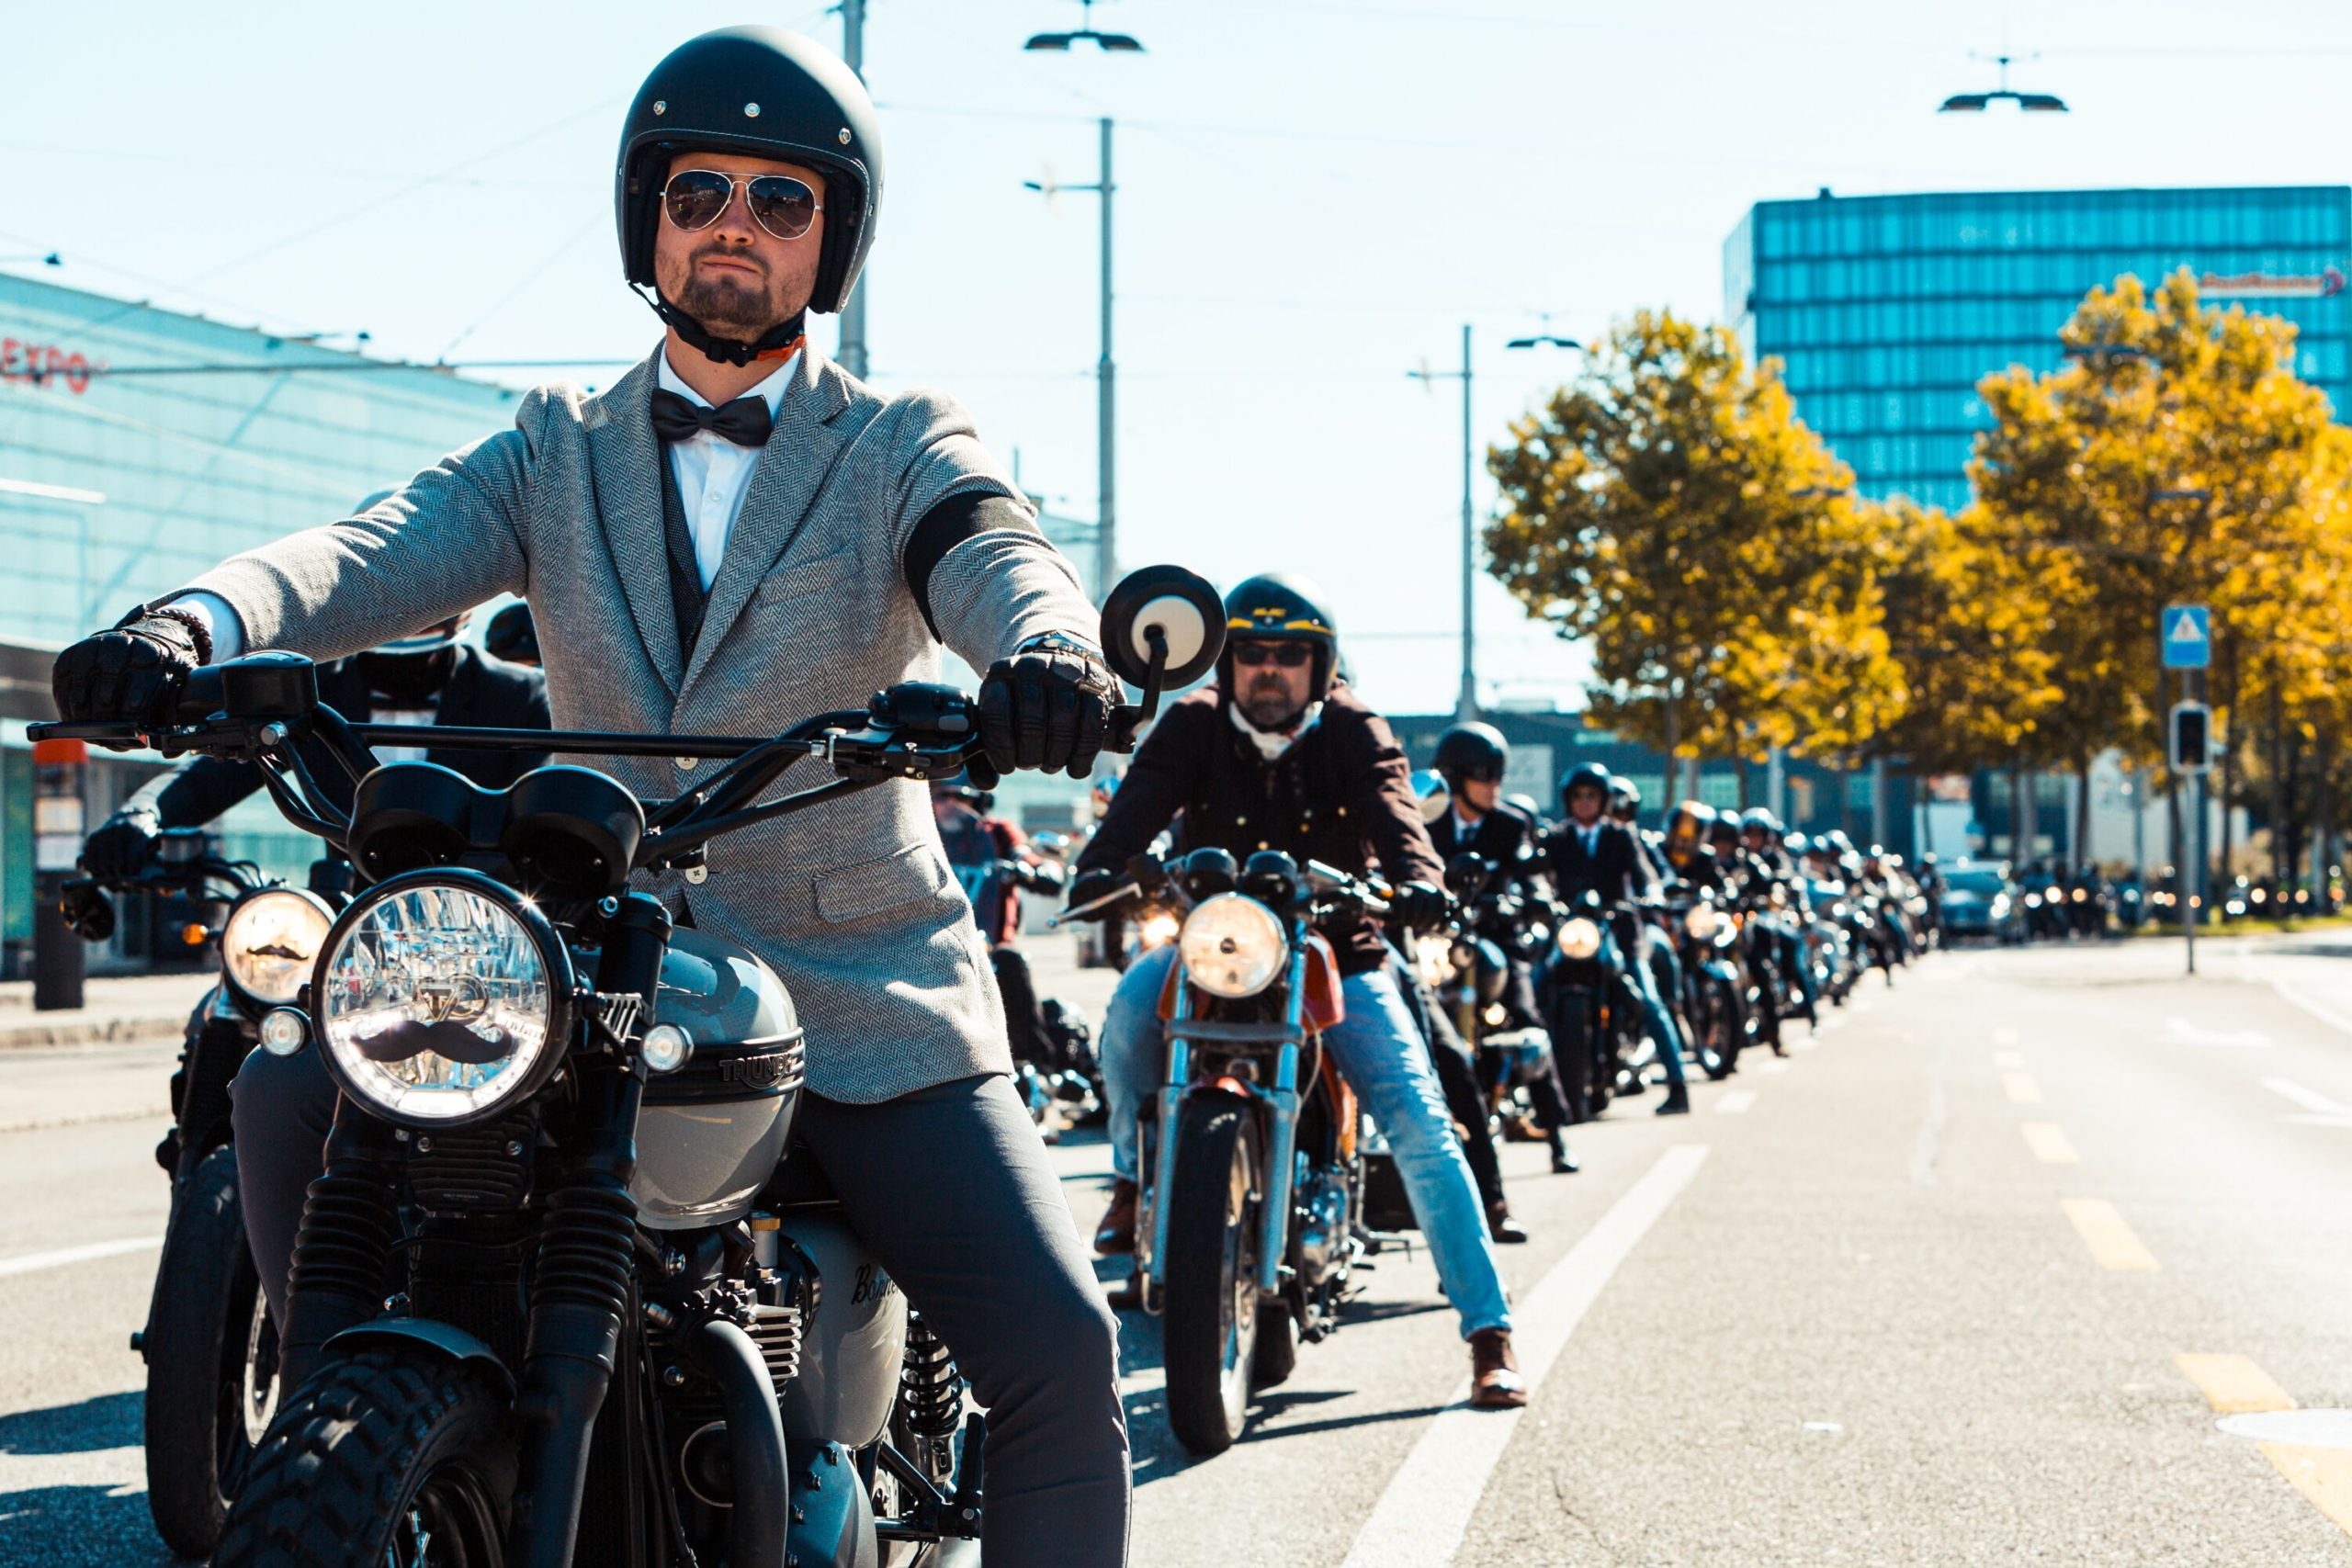 A view of riders riding for the cause to support Cancer awareness as a part of the DGR - the distinguished gentleman's ride